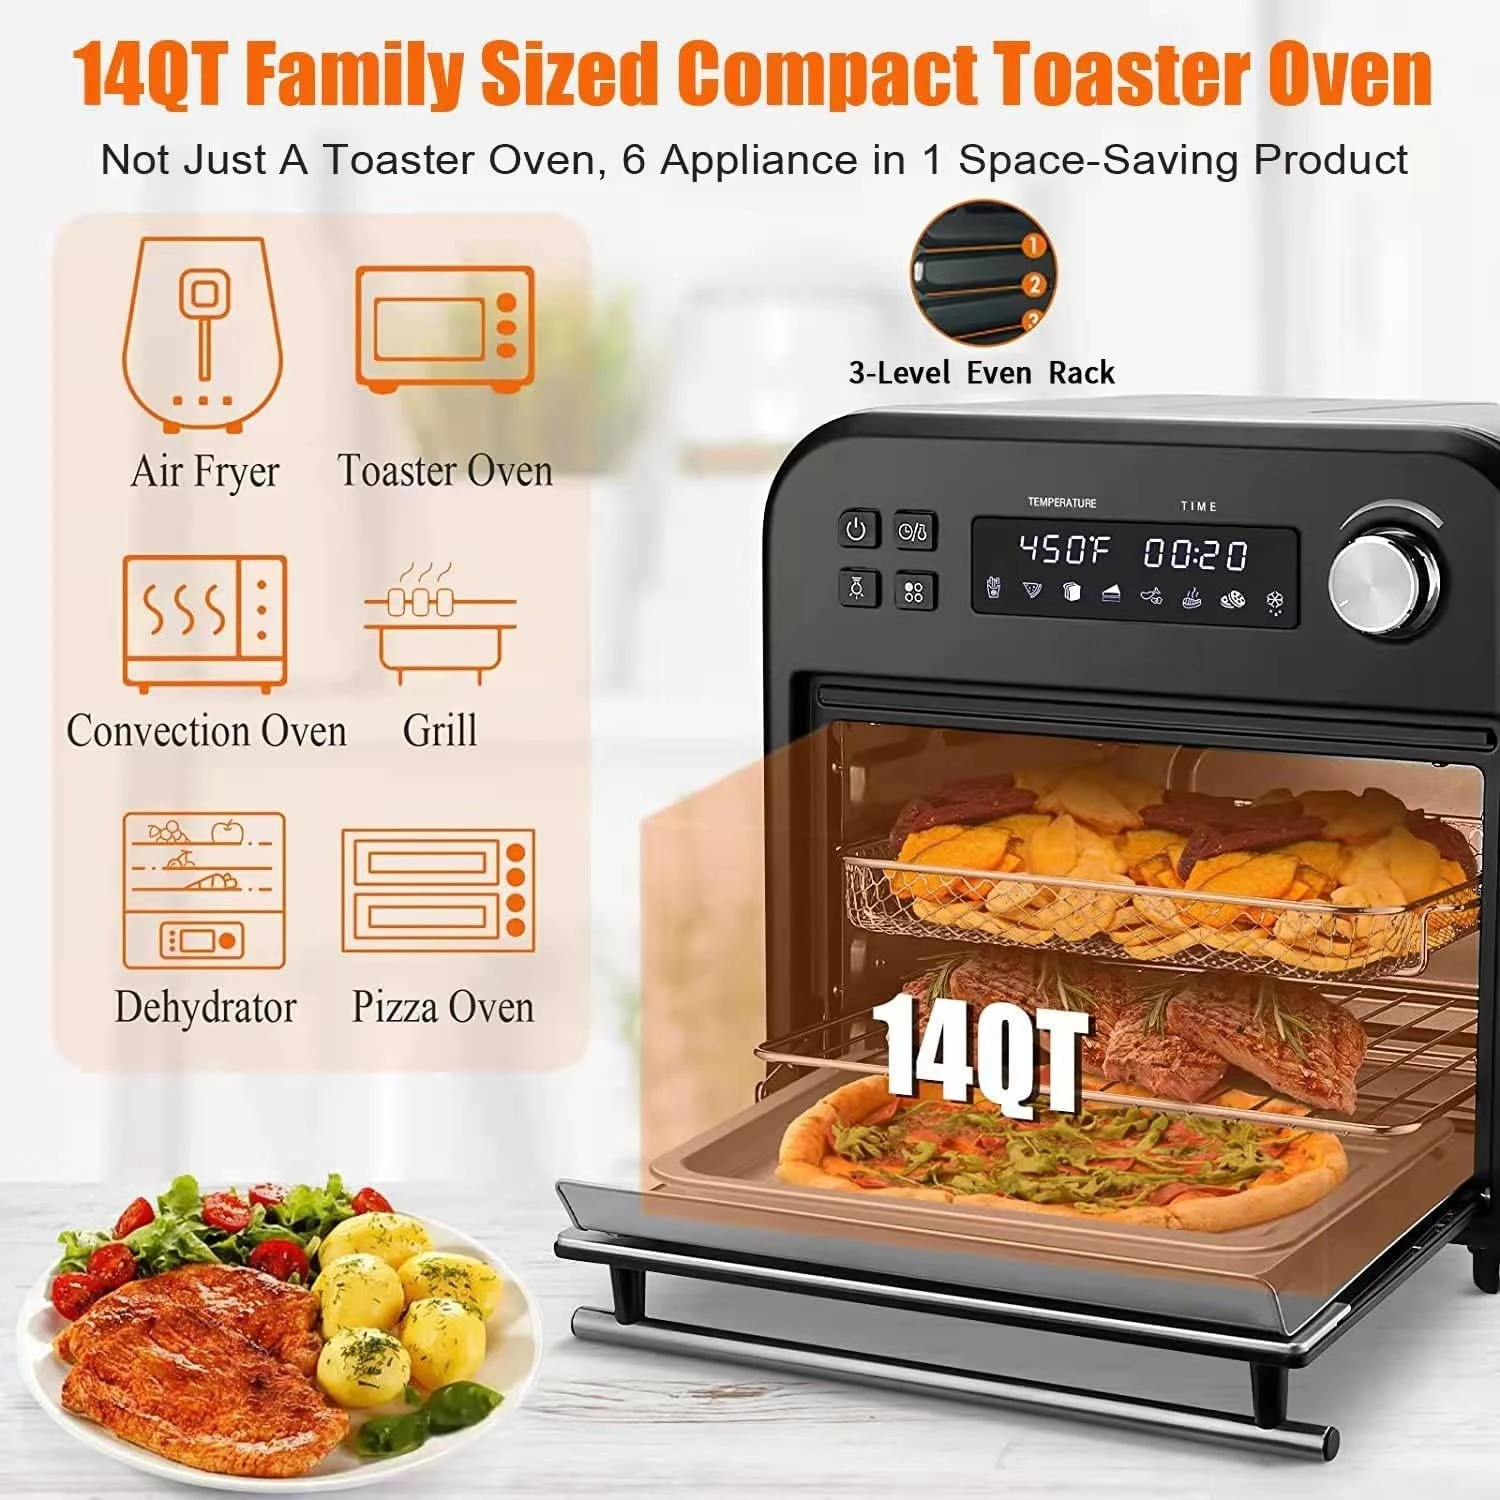 https://ae01.alicdn.com/kf/Sc08e49344a8d41a6ac9c88dd408b66e4X/8-In-1-Smart-Toaster-Oven-Air-Fryer-Combo-6-Slice-Compact-Toaster-Ovens-Countertop-6.jpg